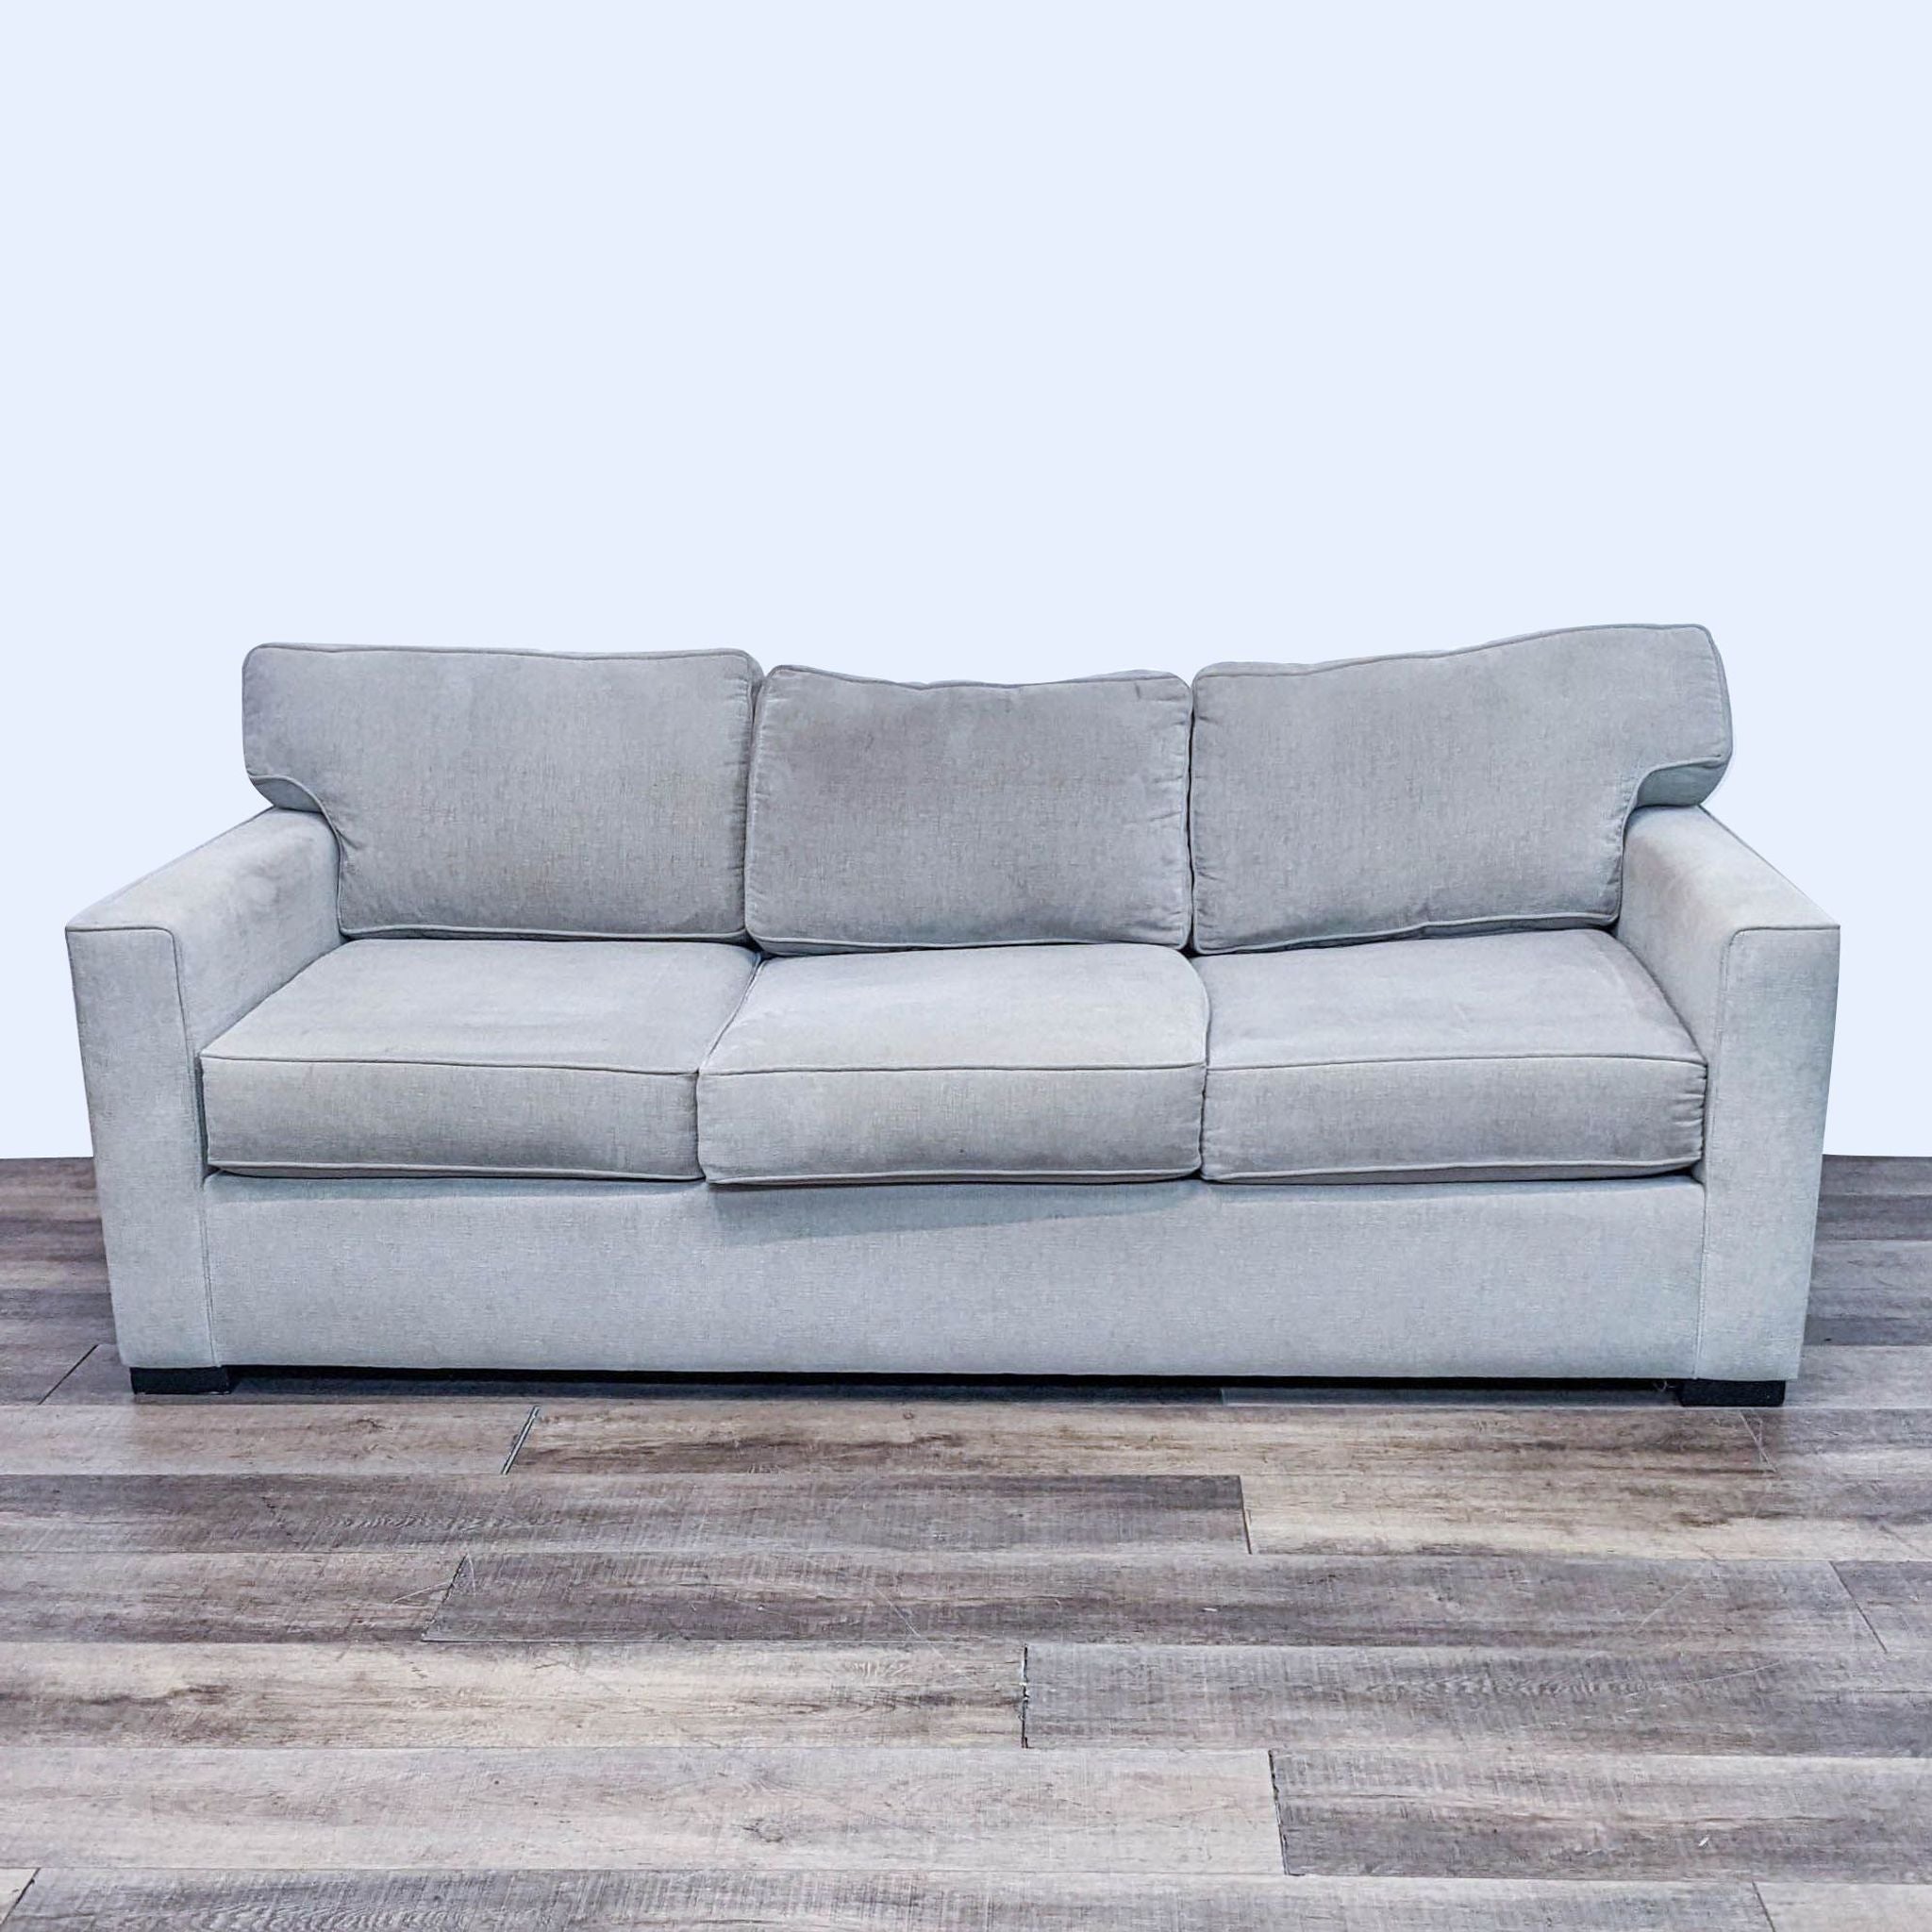 Beige 3-seat Living Spaces sofa with track arms and T-back cushions, upholstered, 85 inches wide.